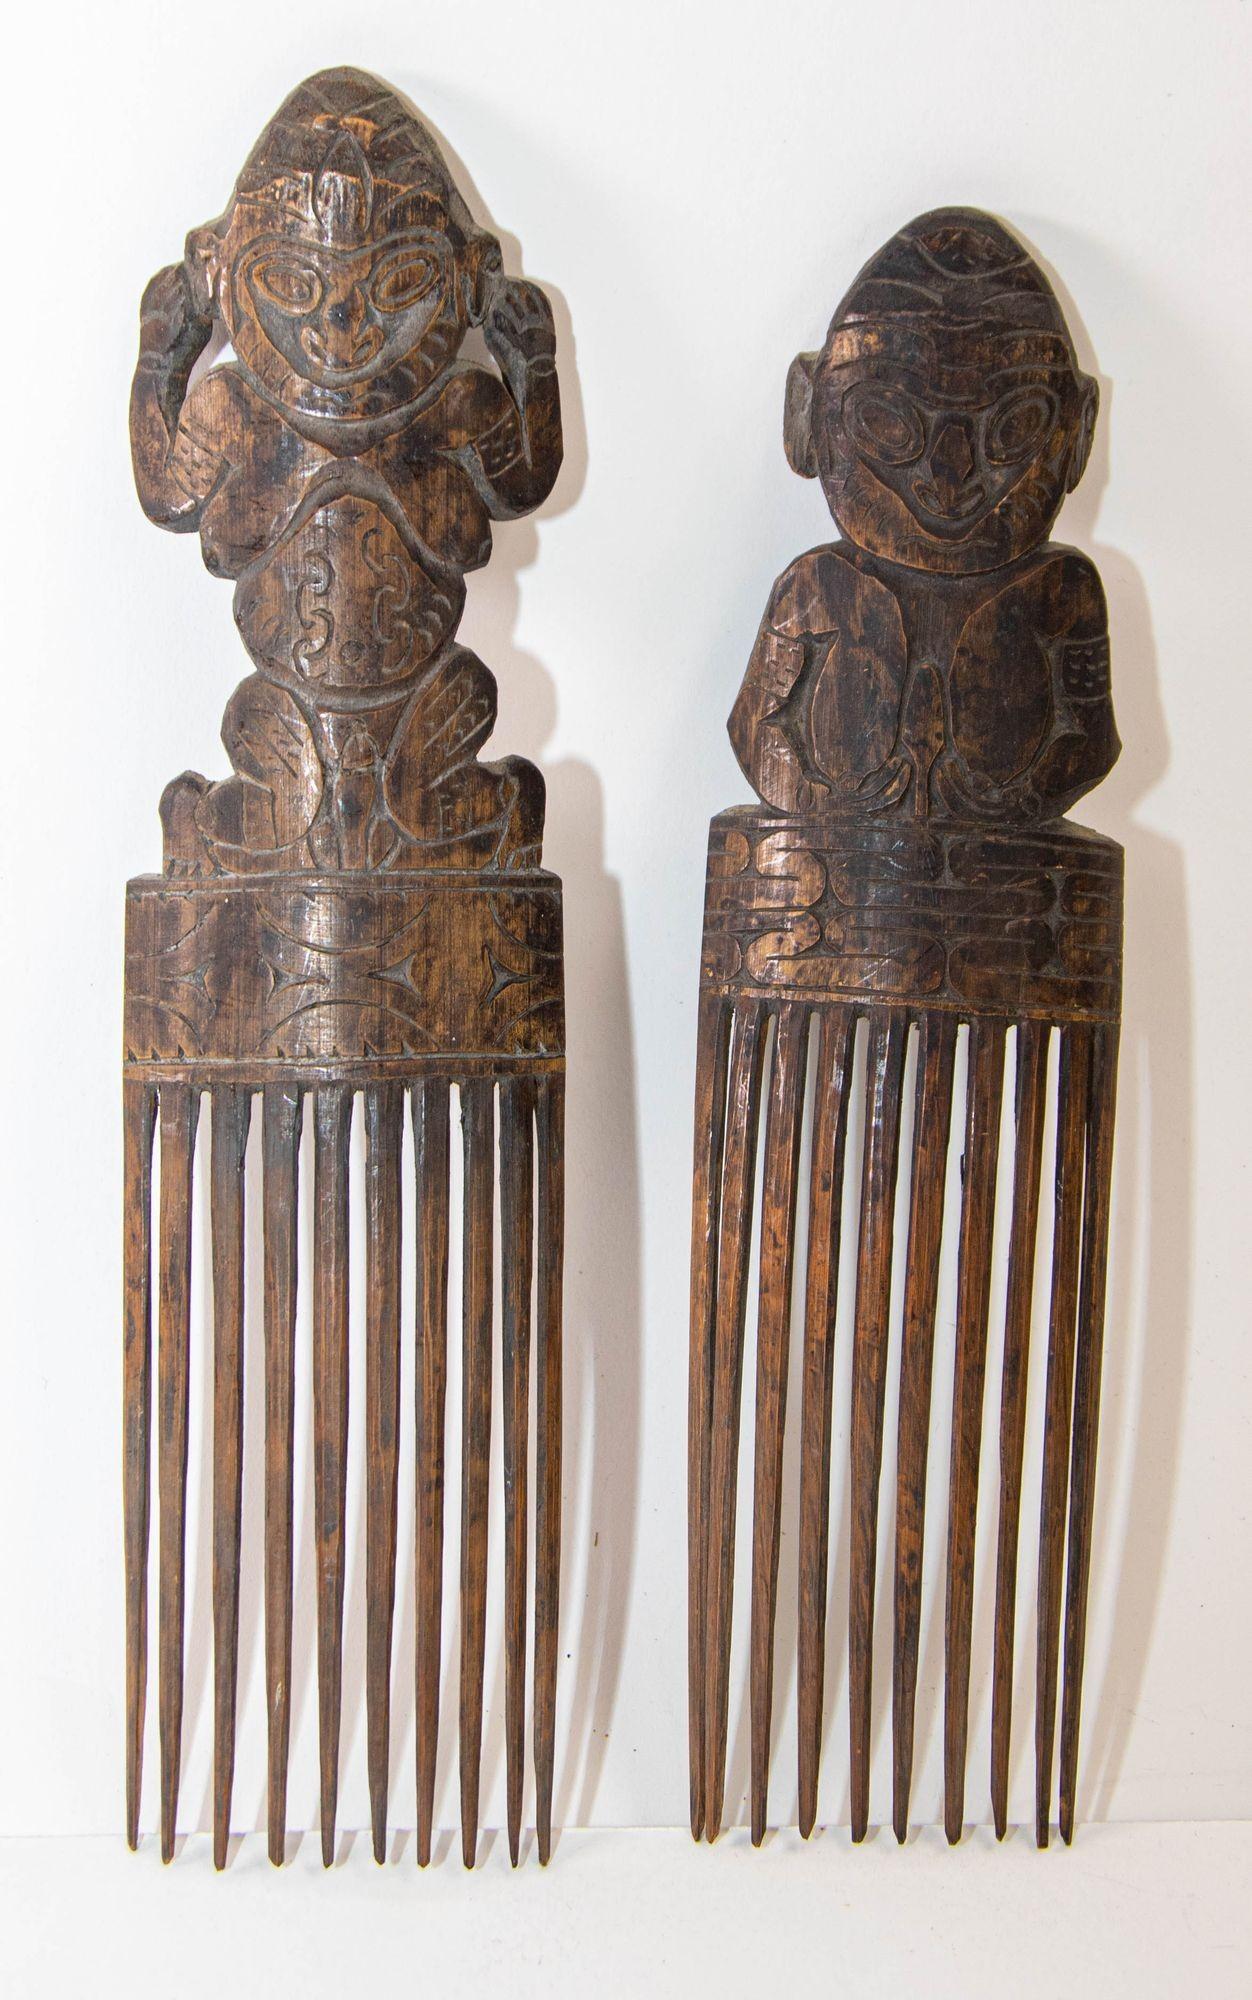 Two Exquisite Yaka Figural Decorative Wooden Combs 